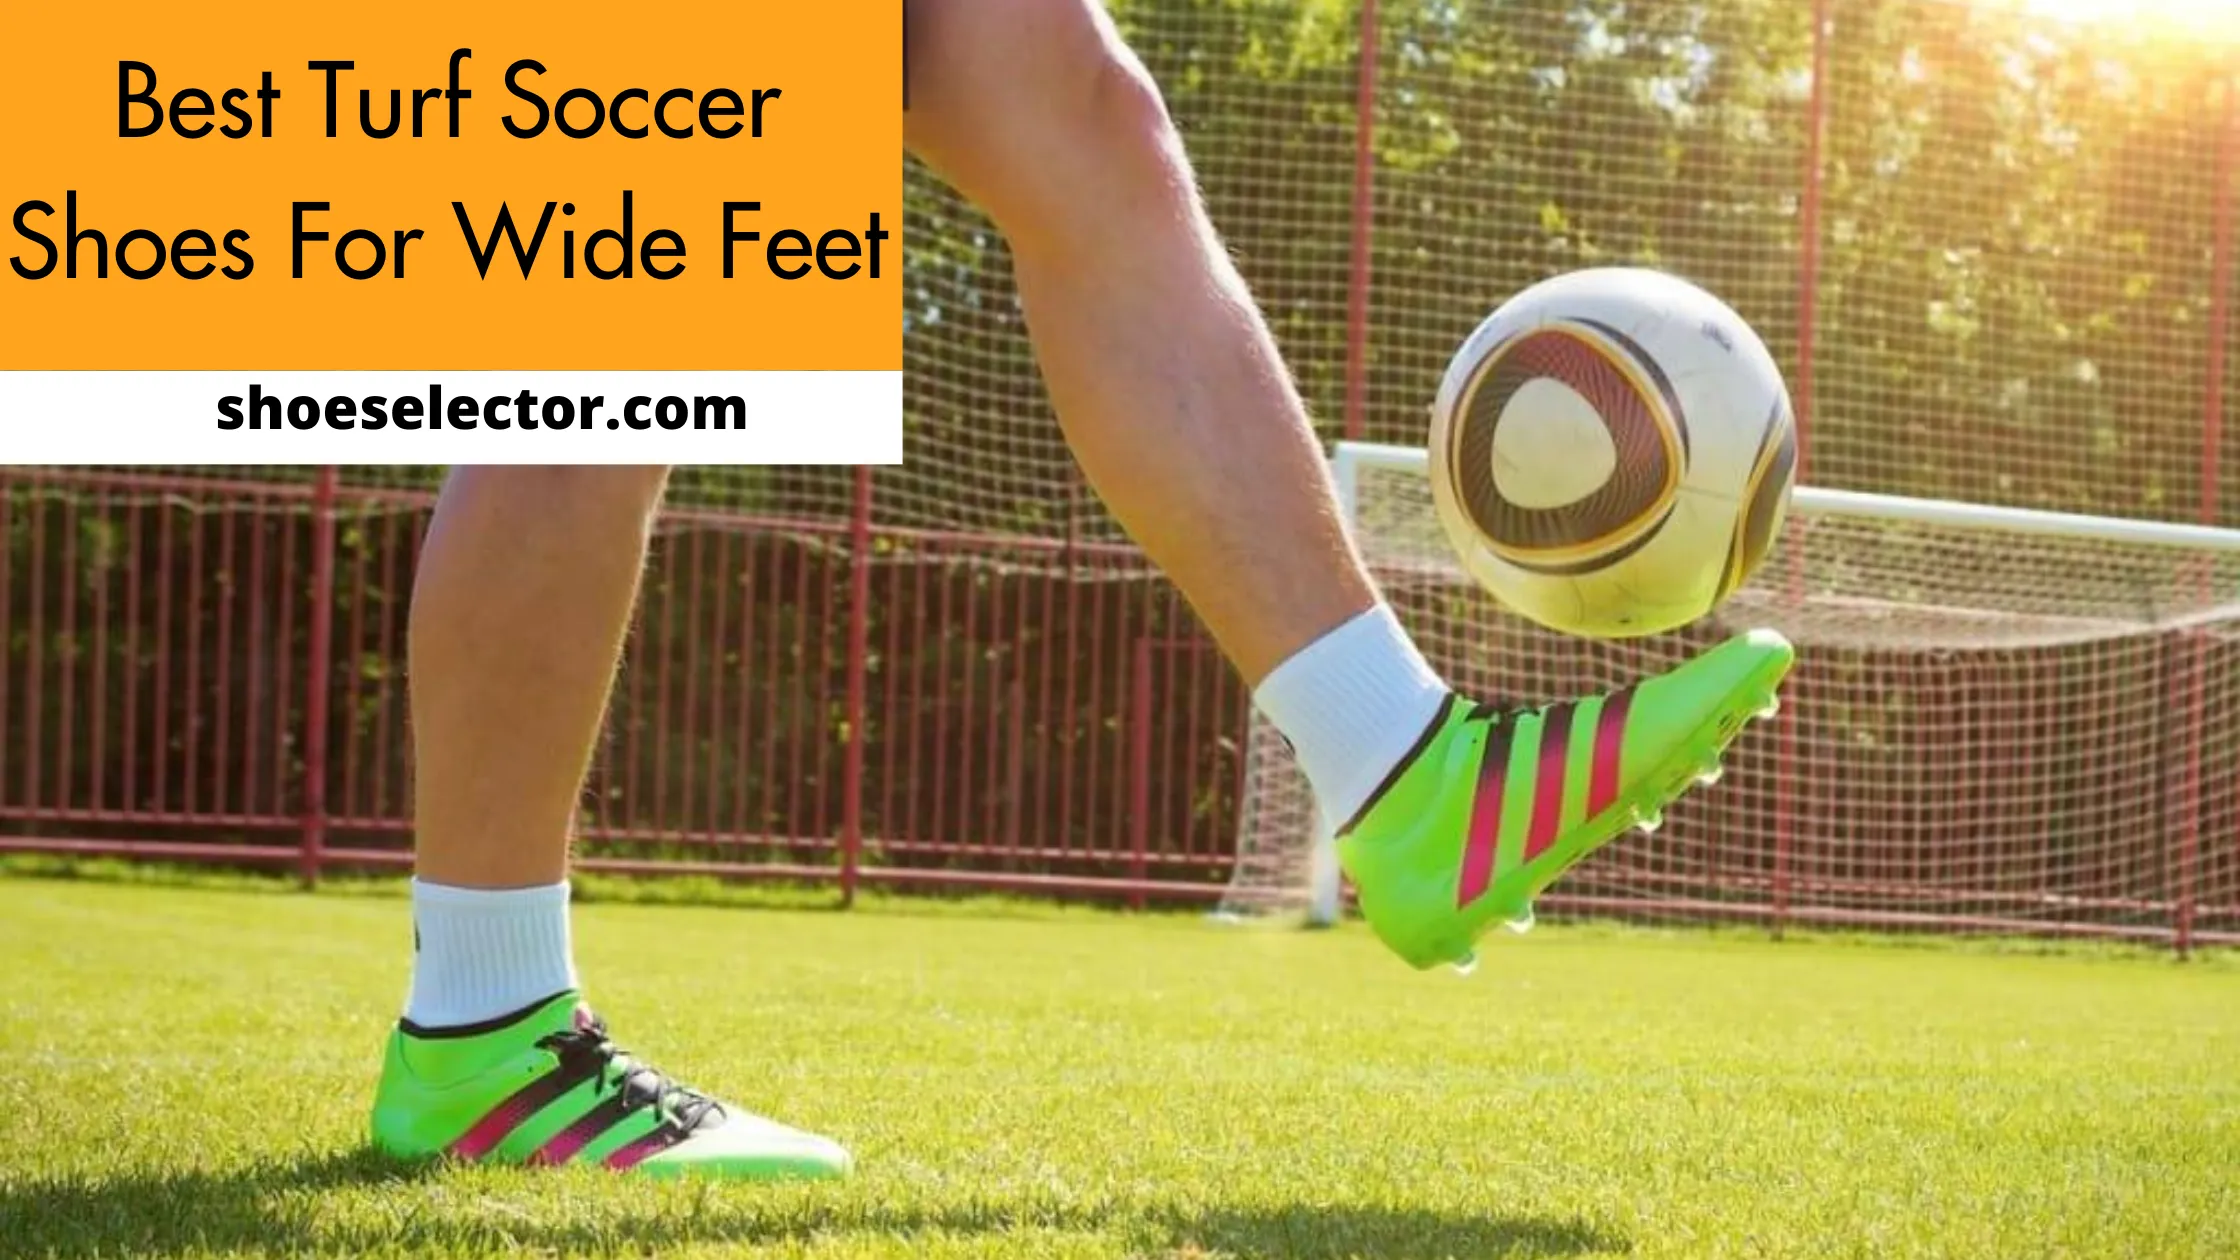 Best Turf Soccer Shoes For Wide Feet - Recommended by Experts